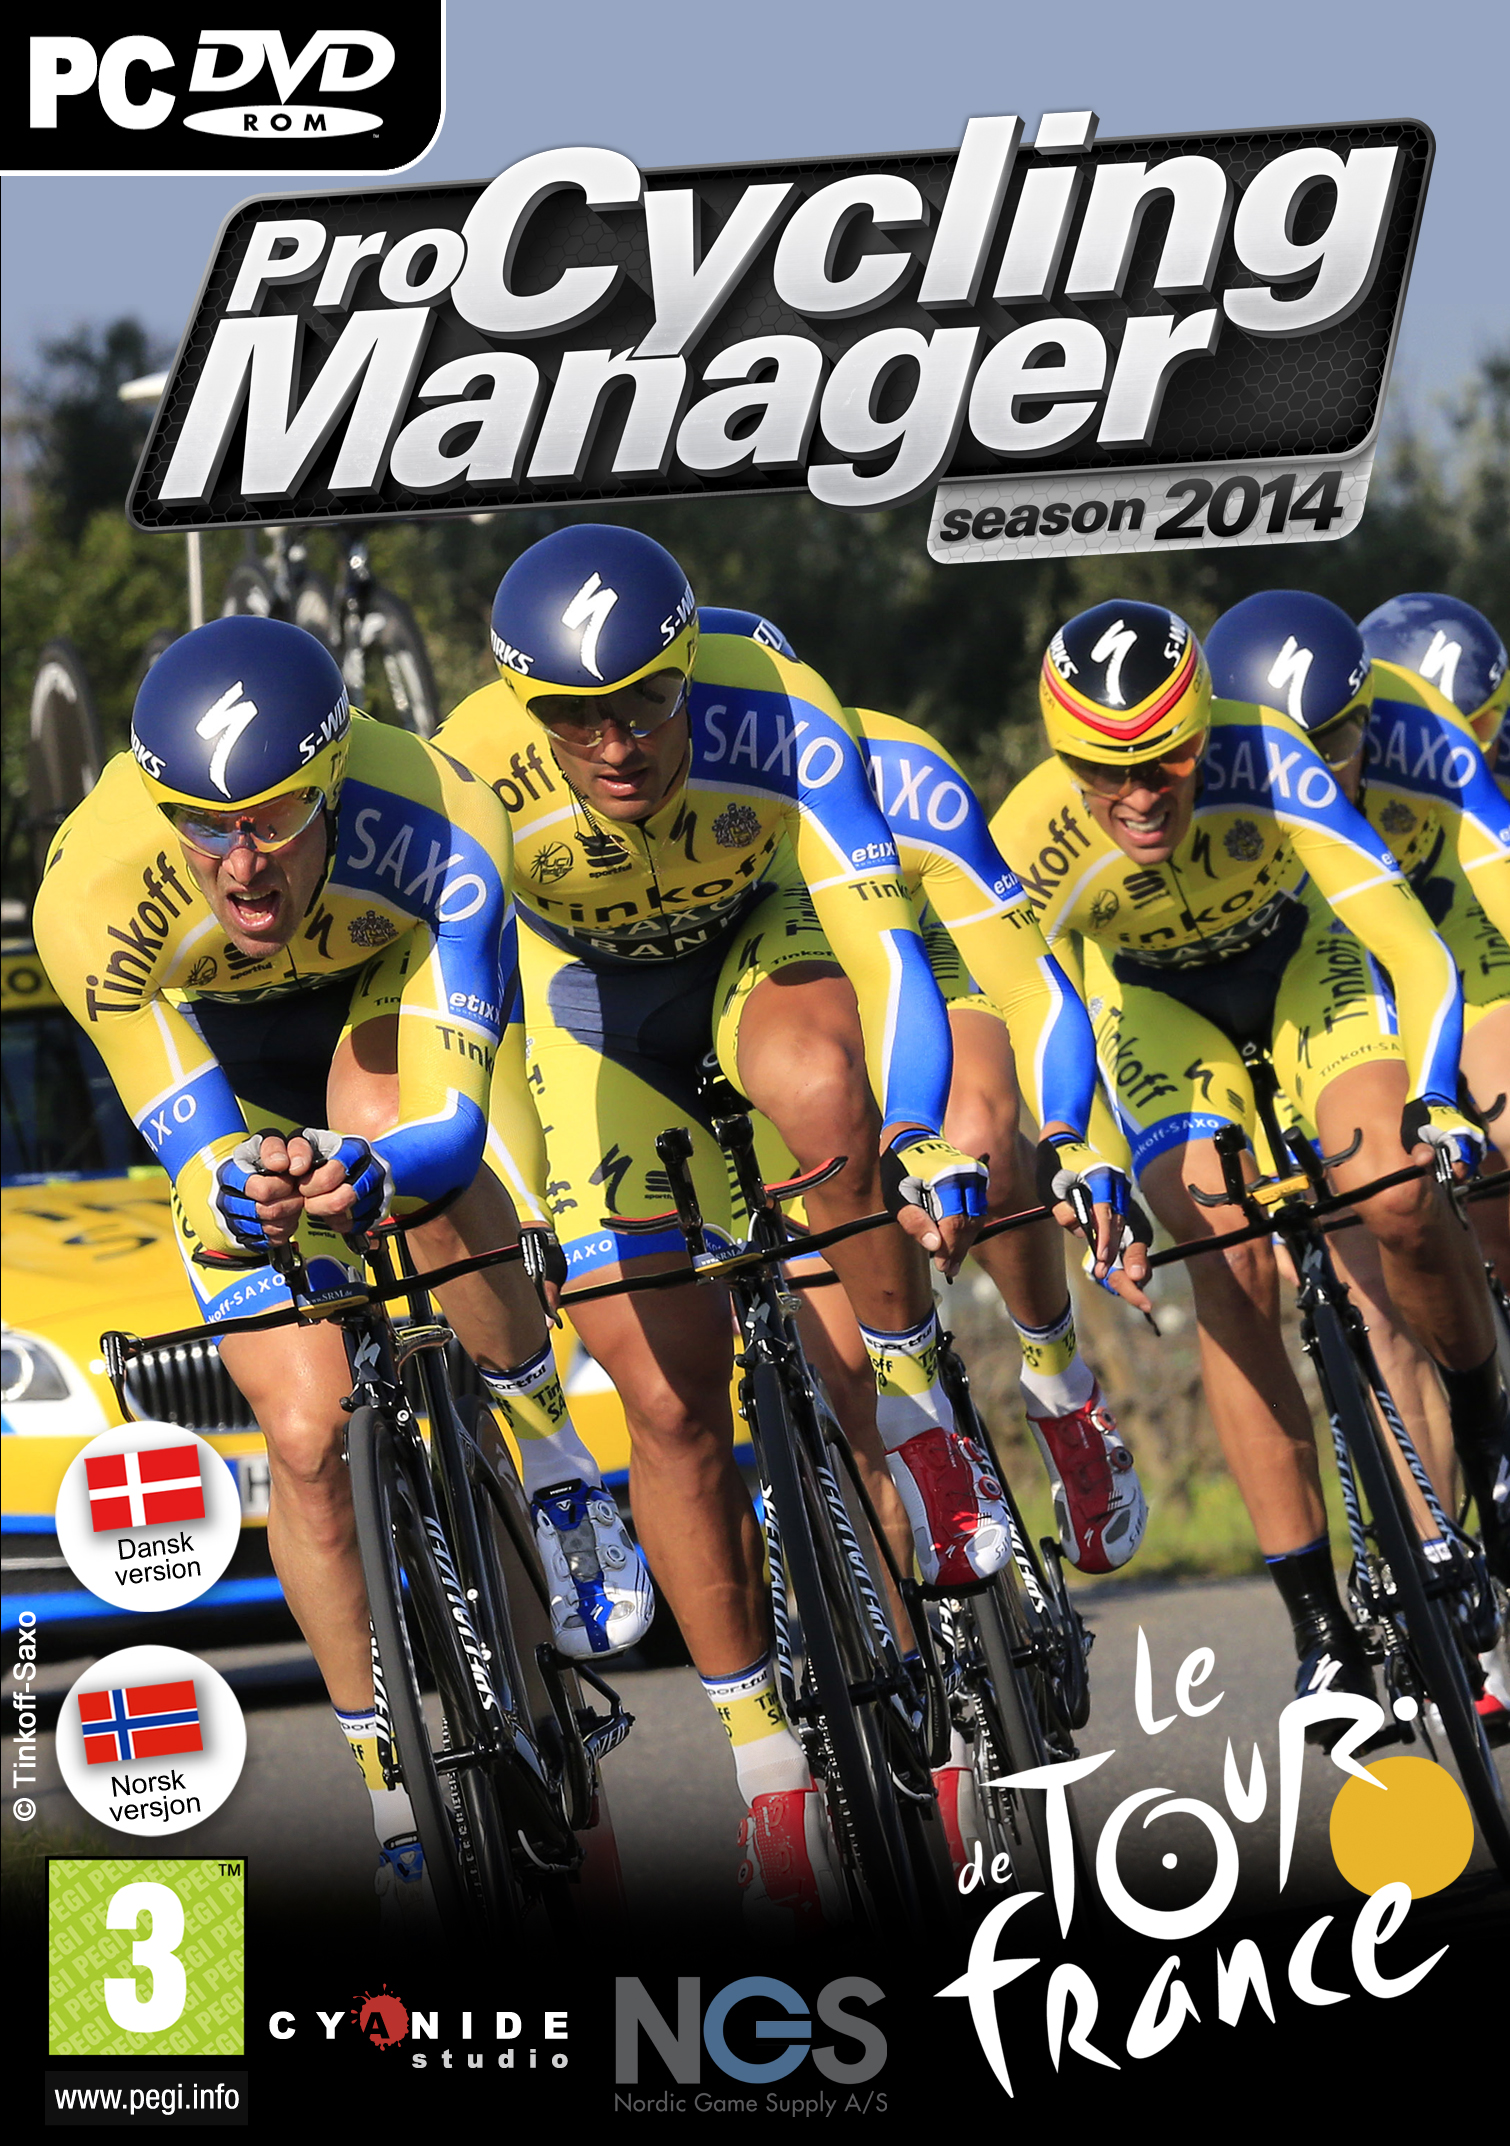 Pro Cycling Manager 2014 Free Download Torrent